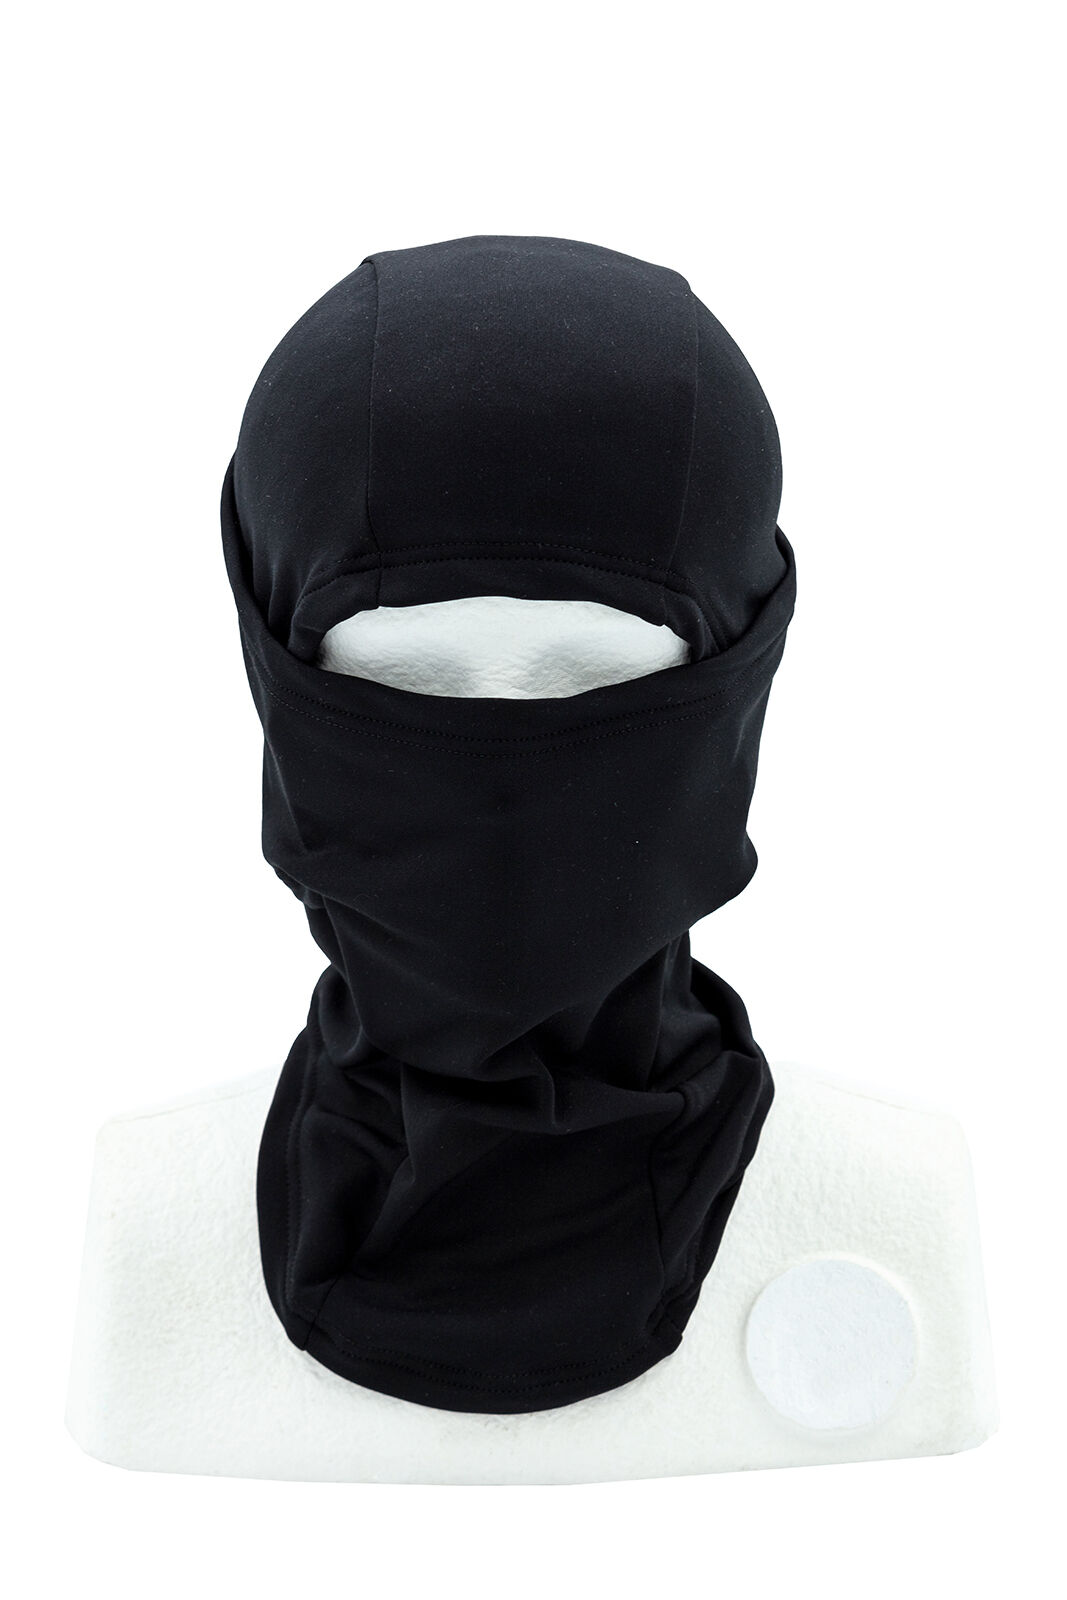 PAG Neckwear Balaclava Fit Micro WR - Cagoule | Hardloop